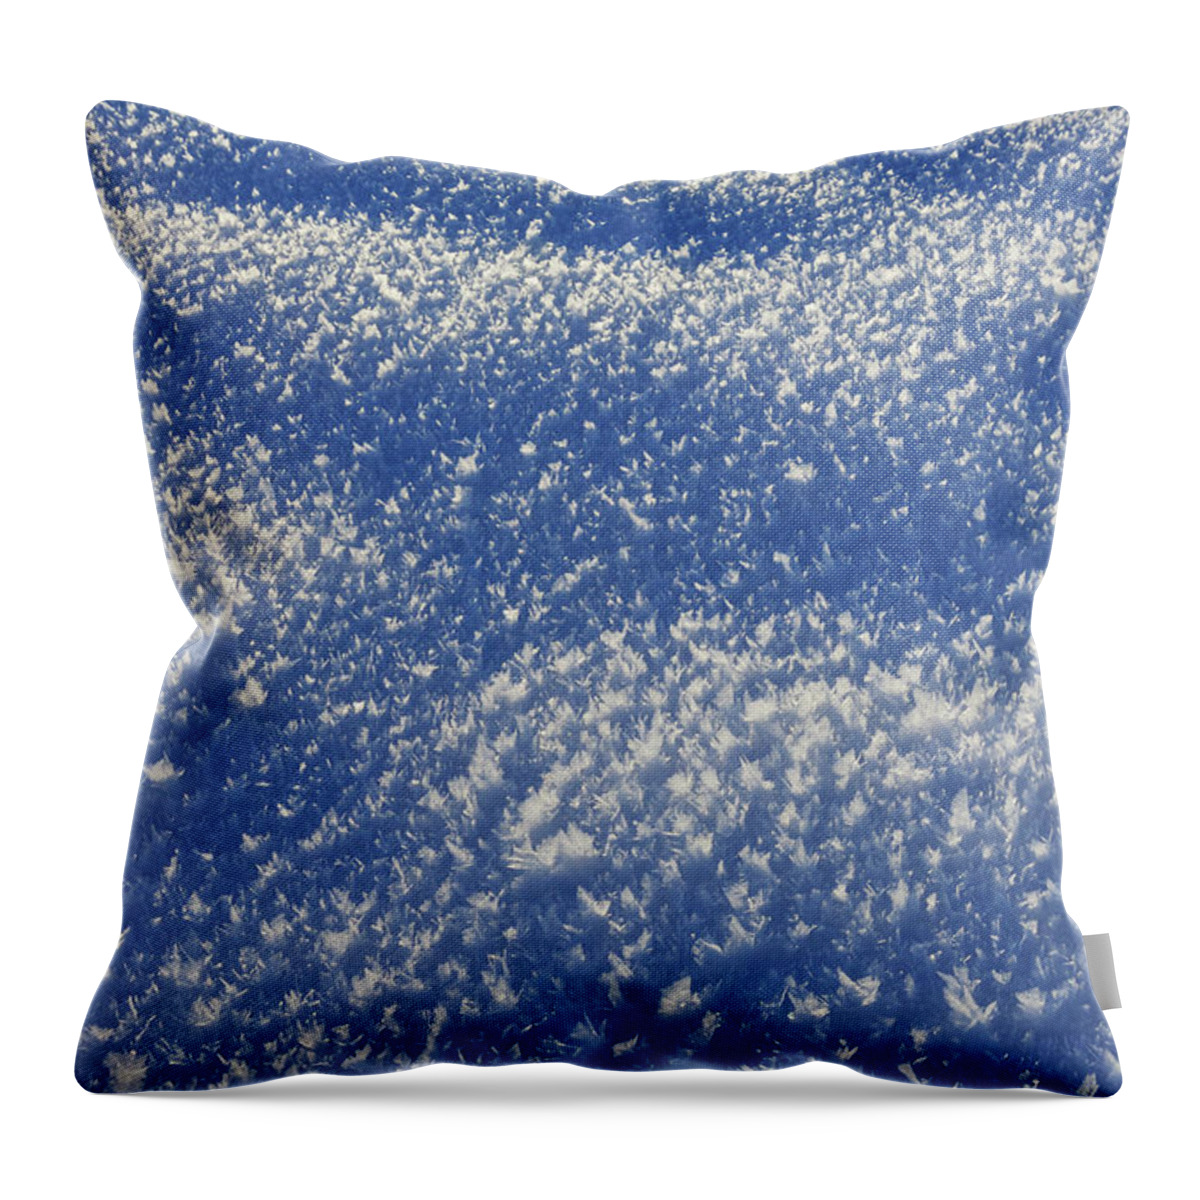 Snow Throw Pillow featuring the photograph Ice Crystals On The Surface Of Snow by Martin Ruegner